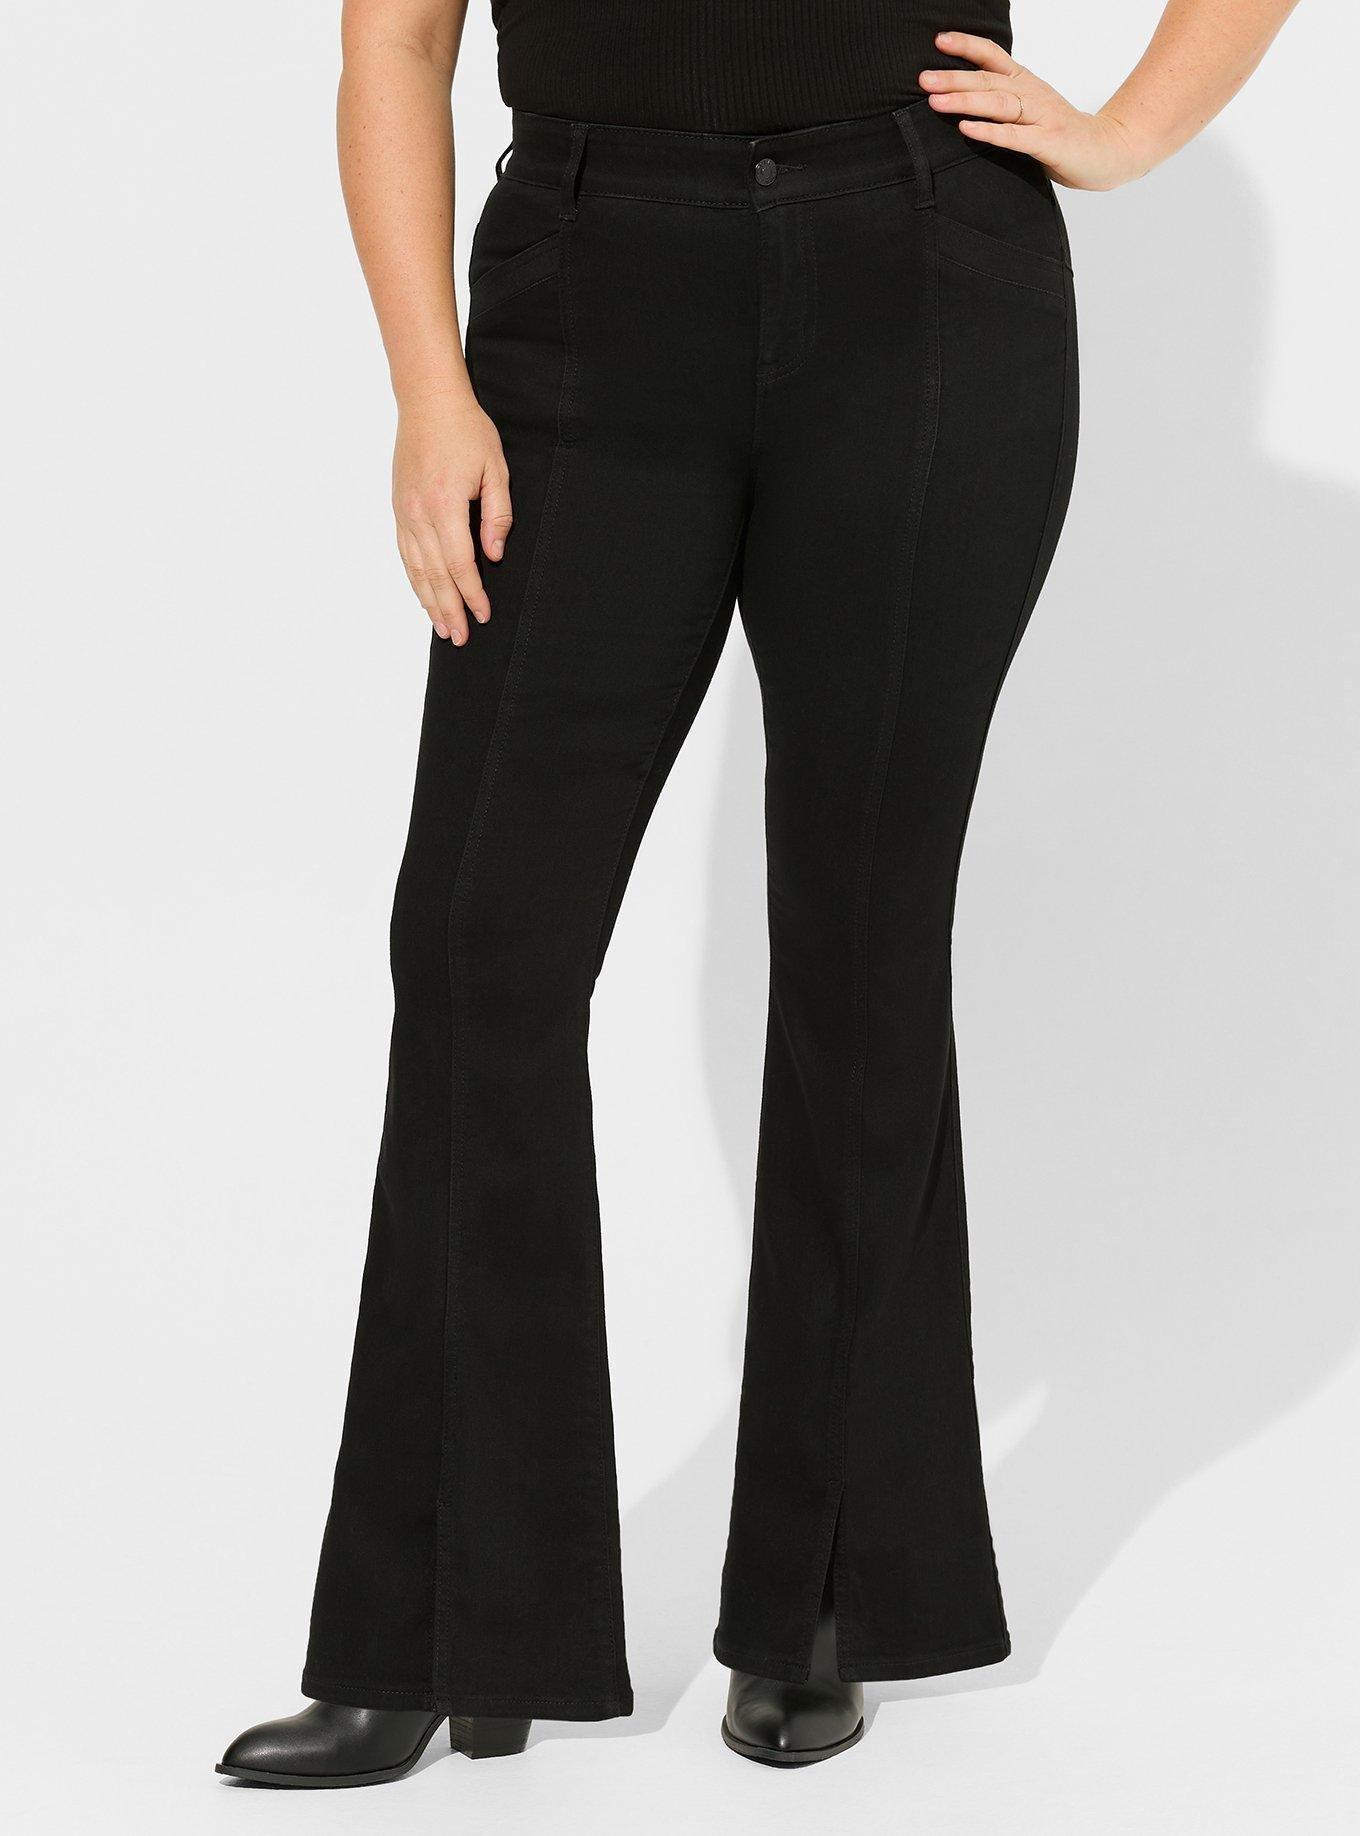 Gap Solid Black Jeggings Size 10 (Tall) - 67% off